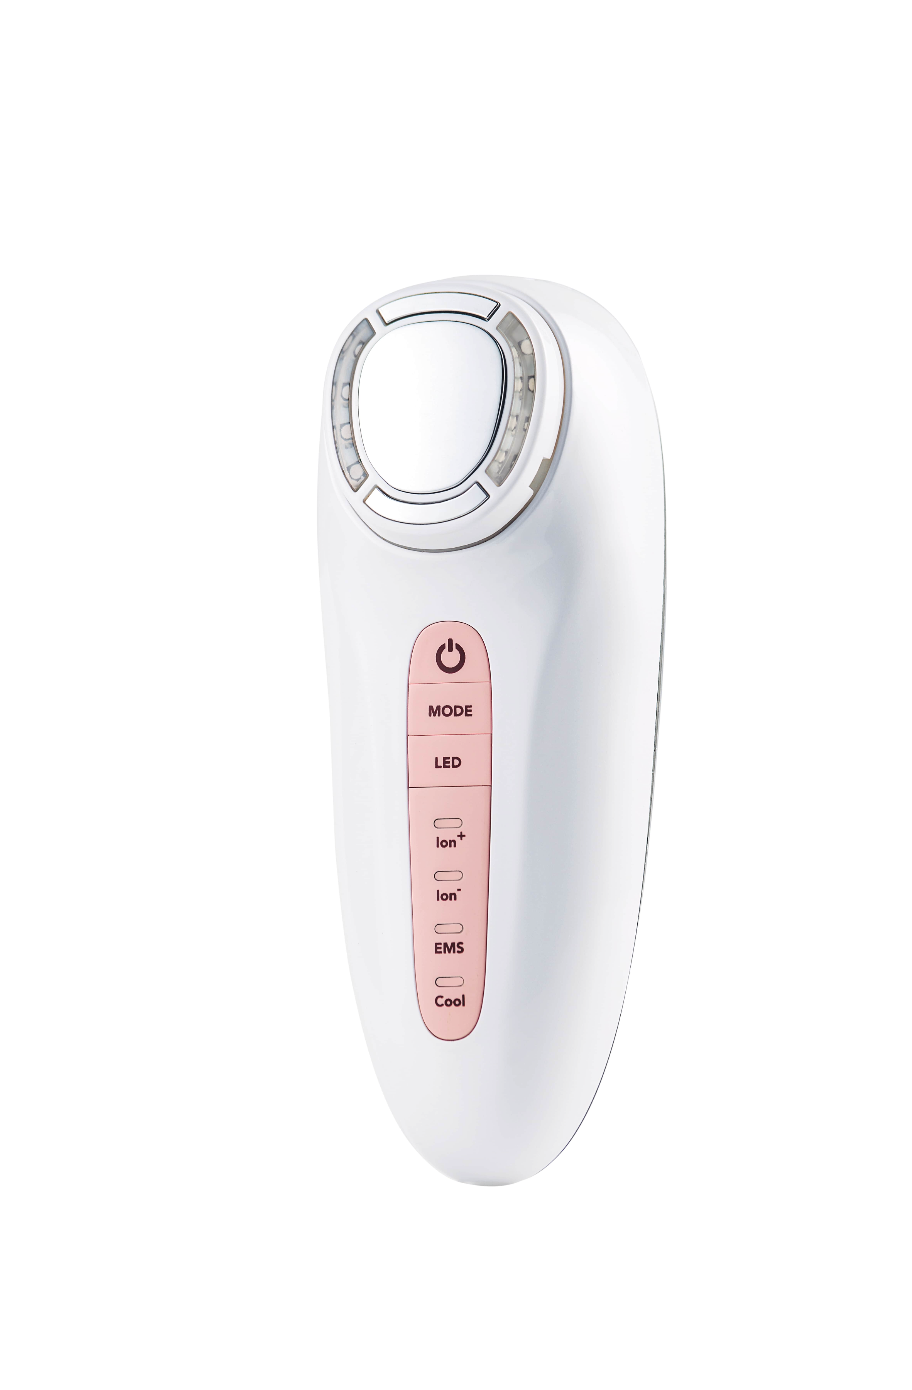 EMAY PLUS 冰熱嫩膚按摩儀 Hot and Cold Ionic Facial Massager